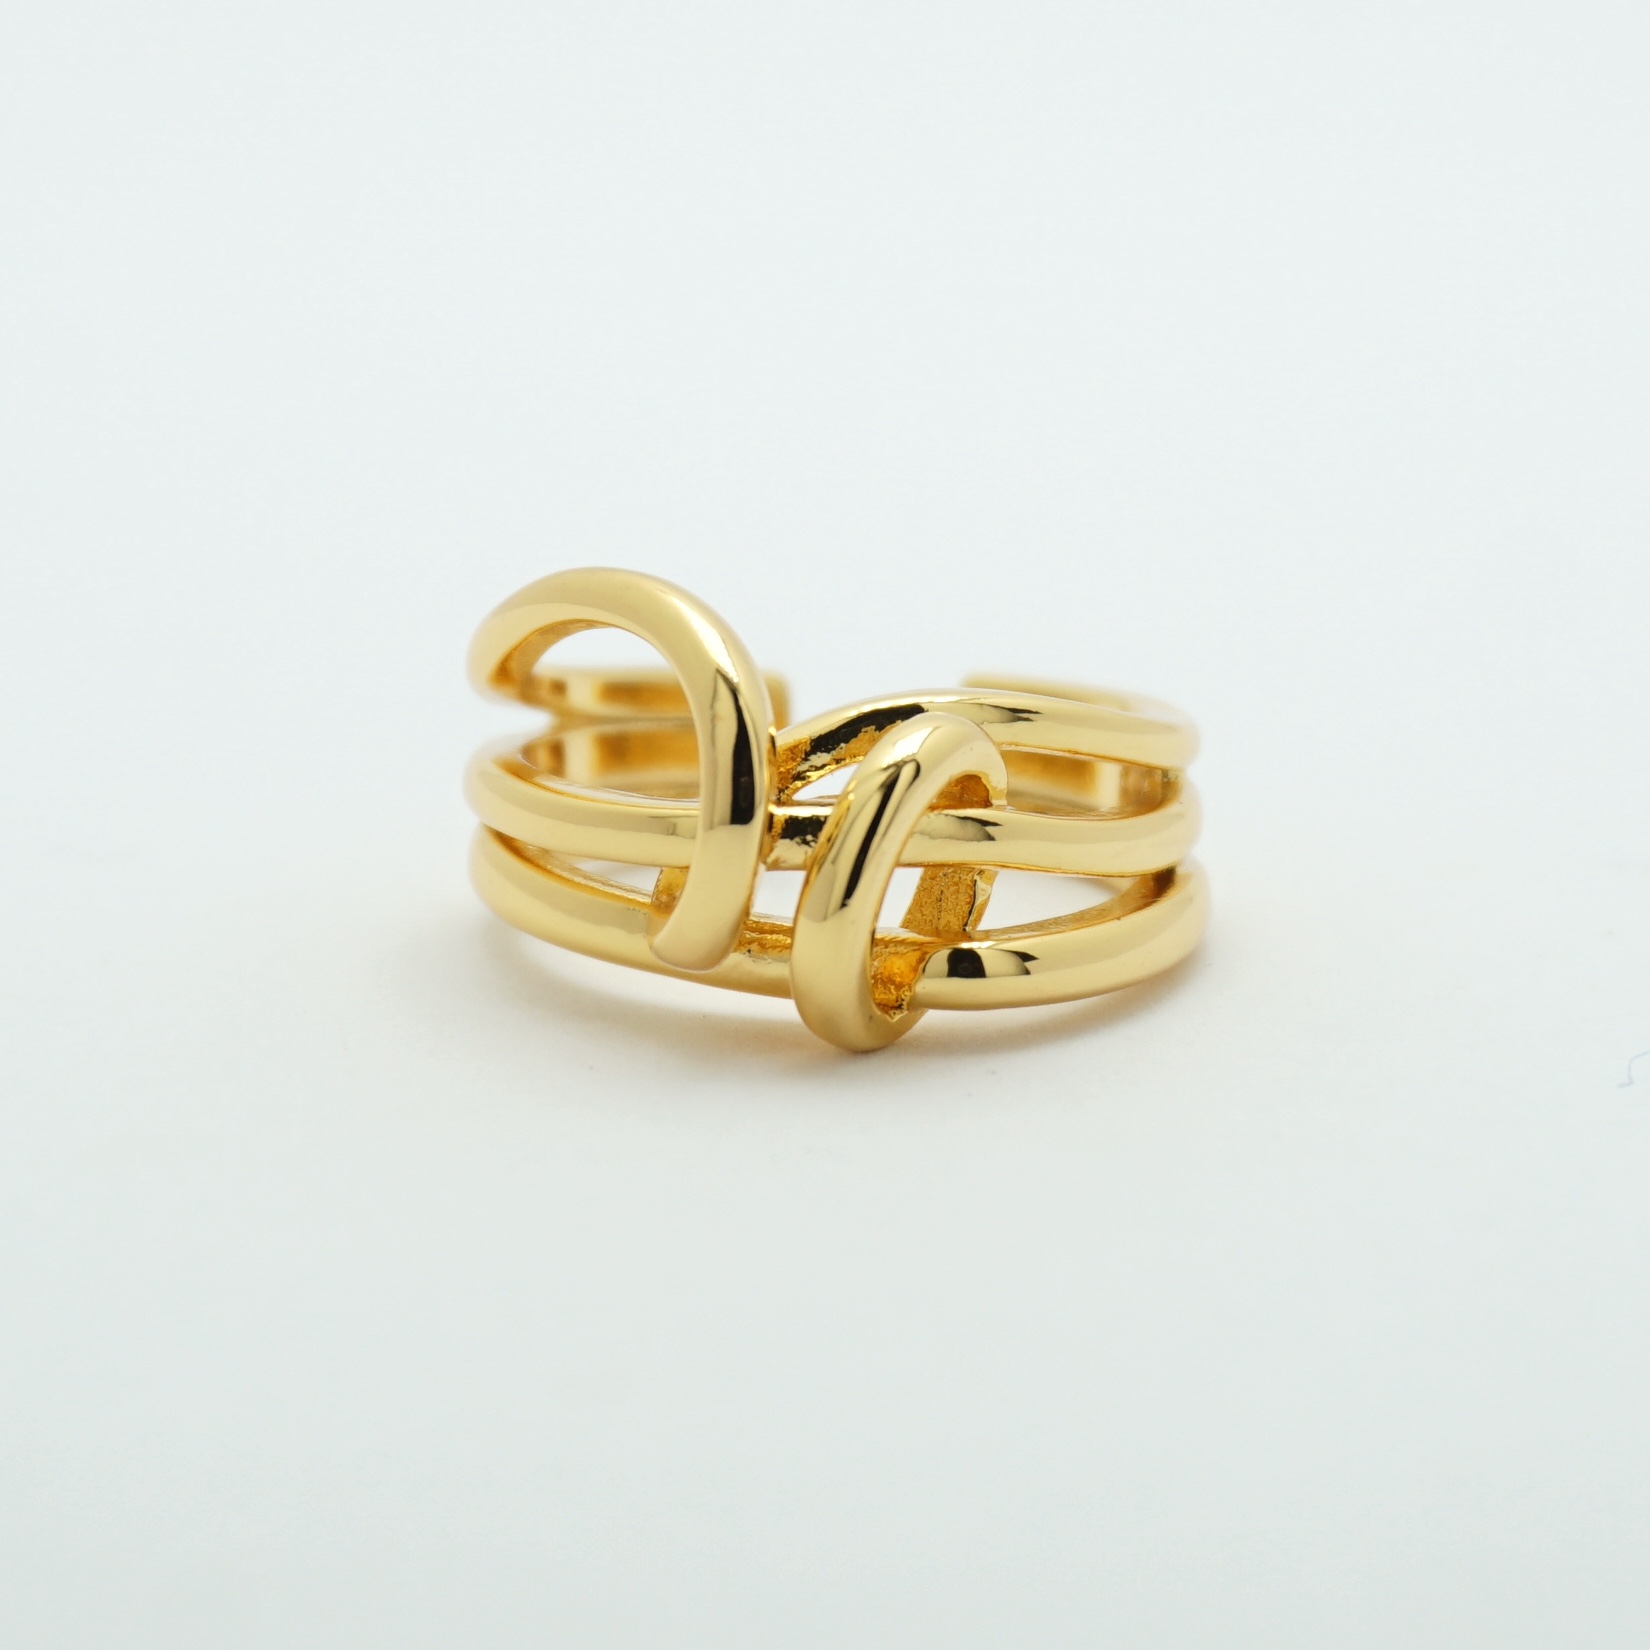 Adjustable 18k Gold Dipped Wavy Ring